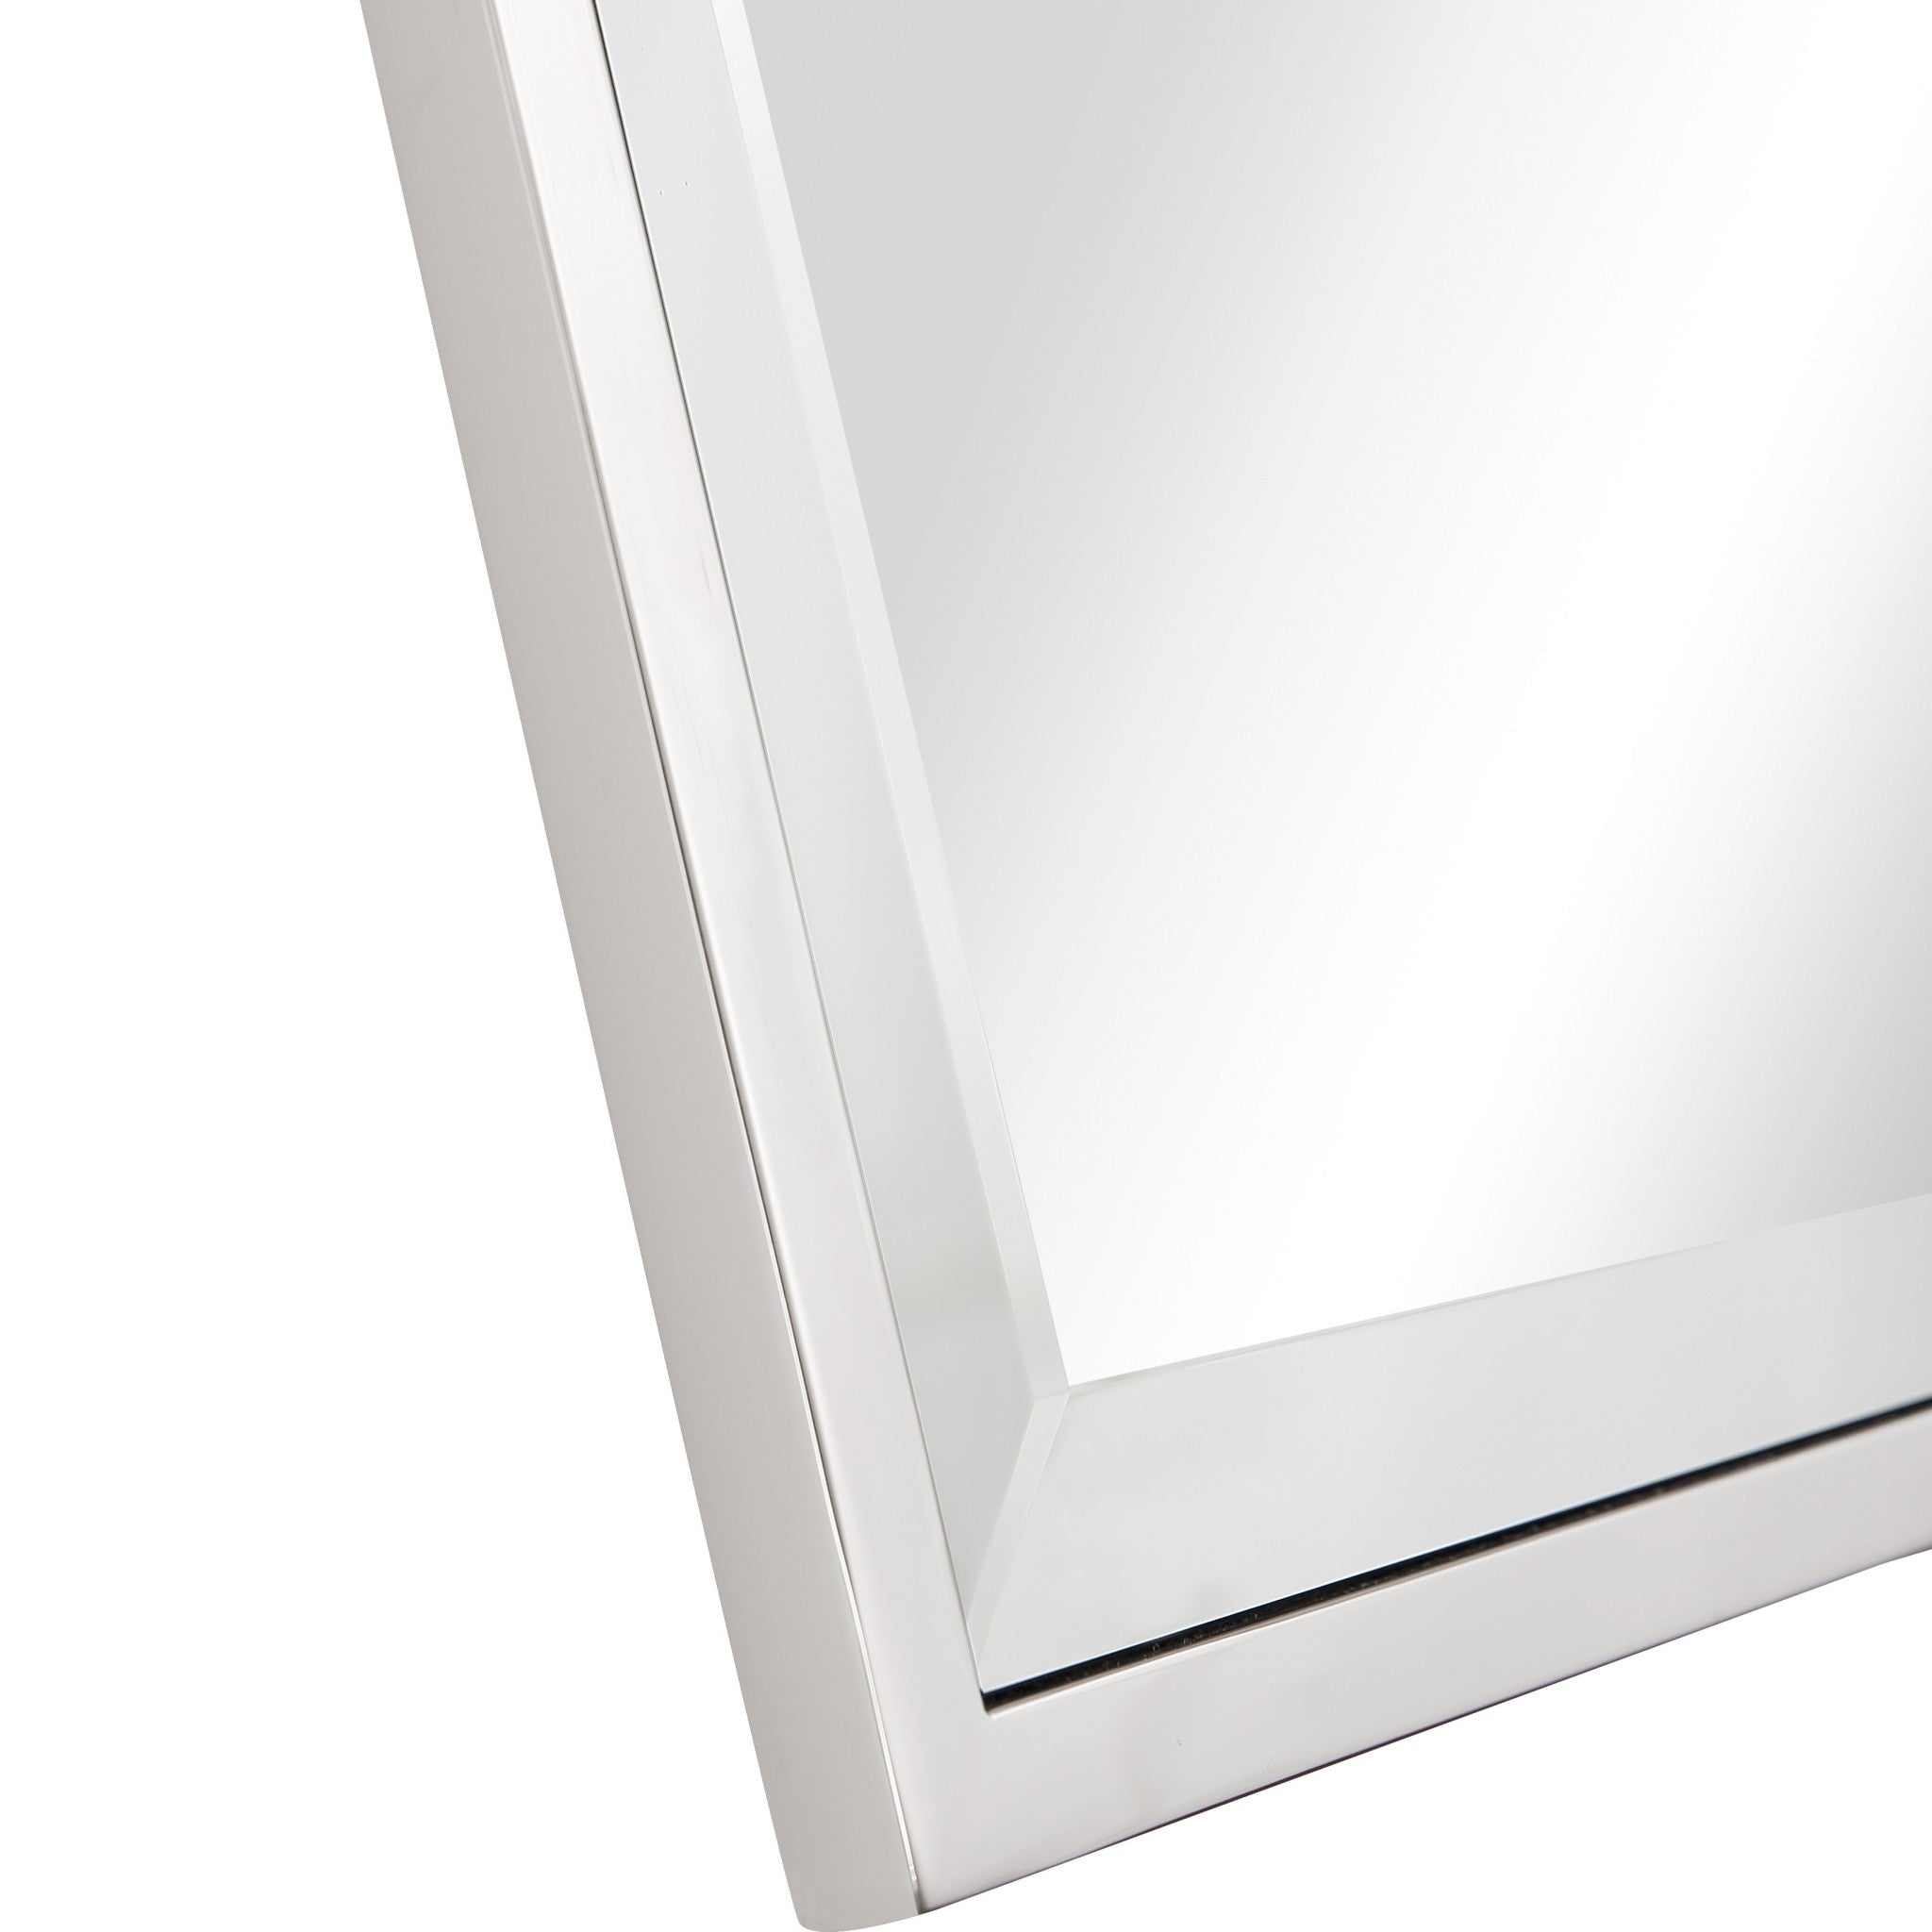 32" Silver Square Metal Framed Accent Mirror